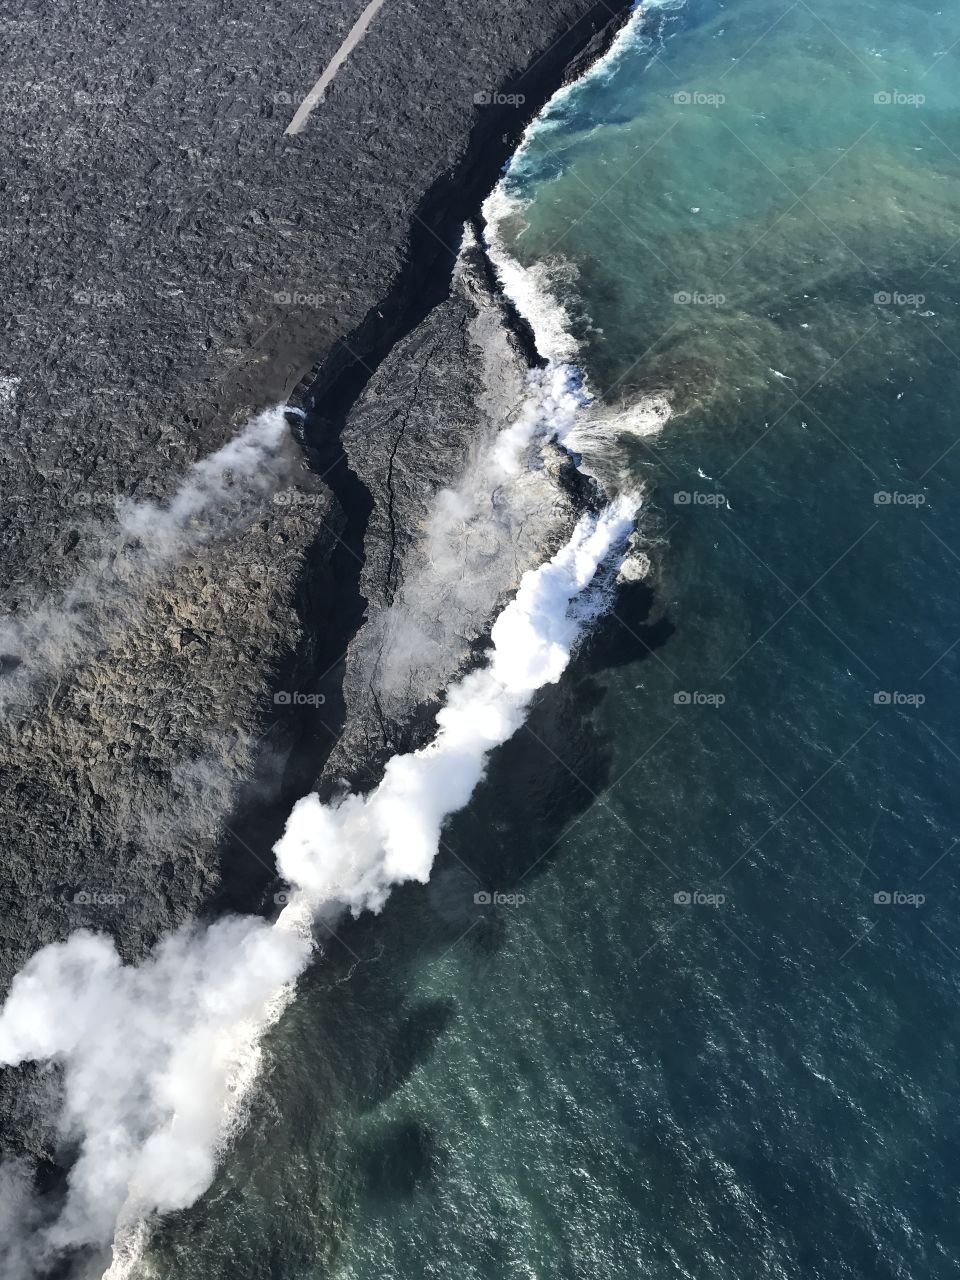 A volcano on the big island in Hawaii continuously spewing hot lava into the ocean. 